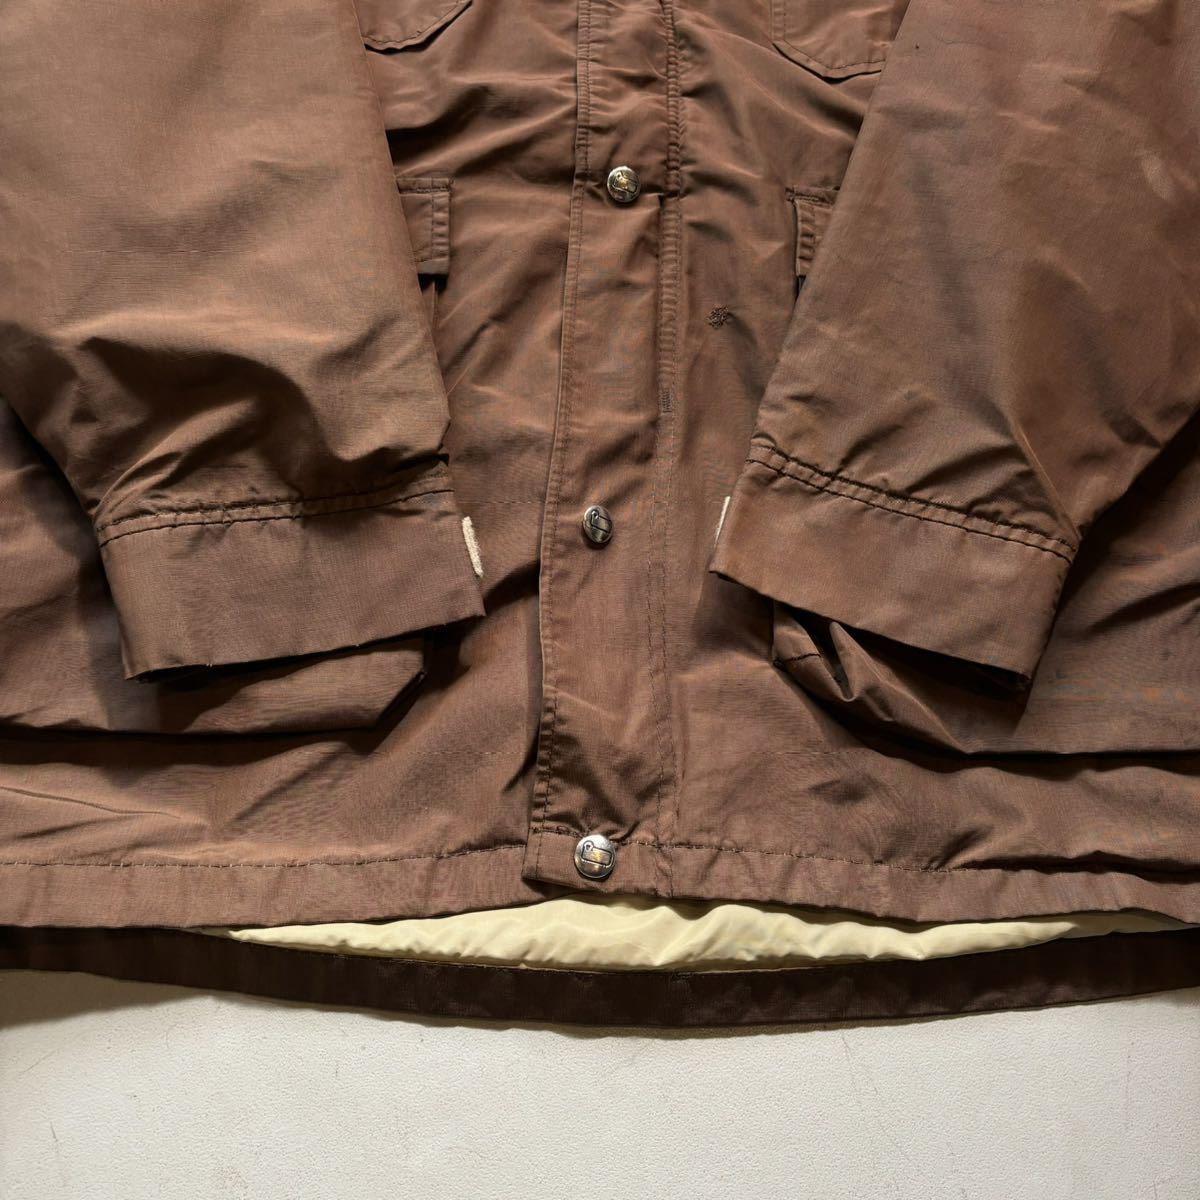 70s〜 Woolrich mountain parka “brown color” 70年代 ウールリッチ マウンテンパーカ 茶色_画像7